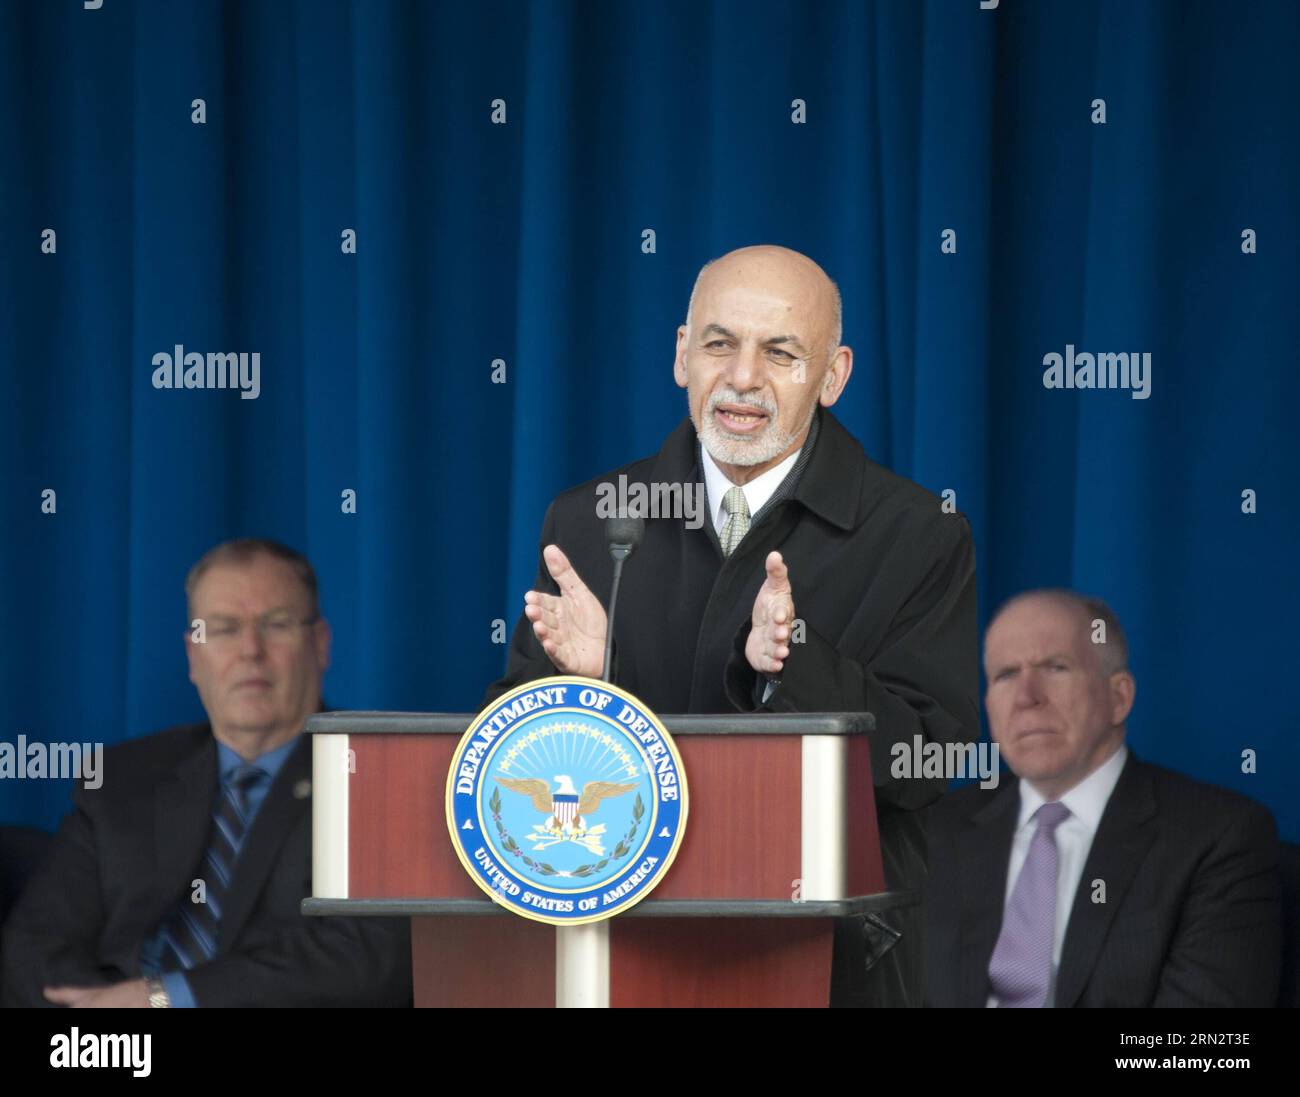 (150323) -- WASHINGTON D.C., March 23, 2015 -- Afghan President Ashraf Ghani speaks during an event to thank service members and veterans who have served in Afghanistan, in Pentagon, Washington D.C., the United States, March 23, 2015. ) U.S.-WASHINGTON D.C.-AFGHAN PRESIDENT-VISIT PatsyxLynch PUBLICATIONxNOTxINxCHN   Washington D C March 23 2015 Afghan President Ashraf Ghani Speaks during to Event to Thank Service Members and Veterans Who have served in Afghanistan in Pentagon Washington D C The United States March 23 2015 U S Washington D C Afghan President Visit  PUBLICATIONxNOTxINxCHN Stock Photo